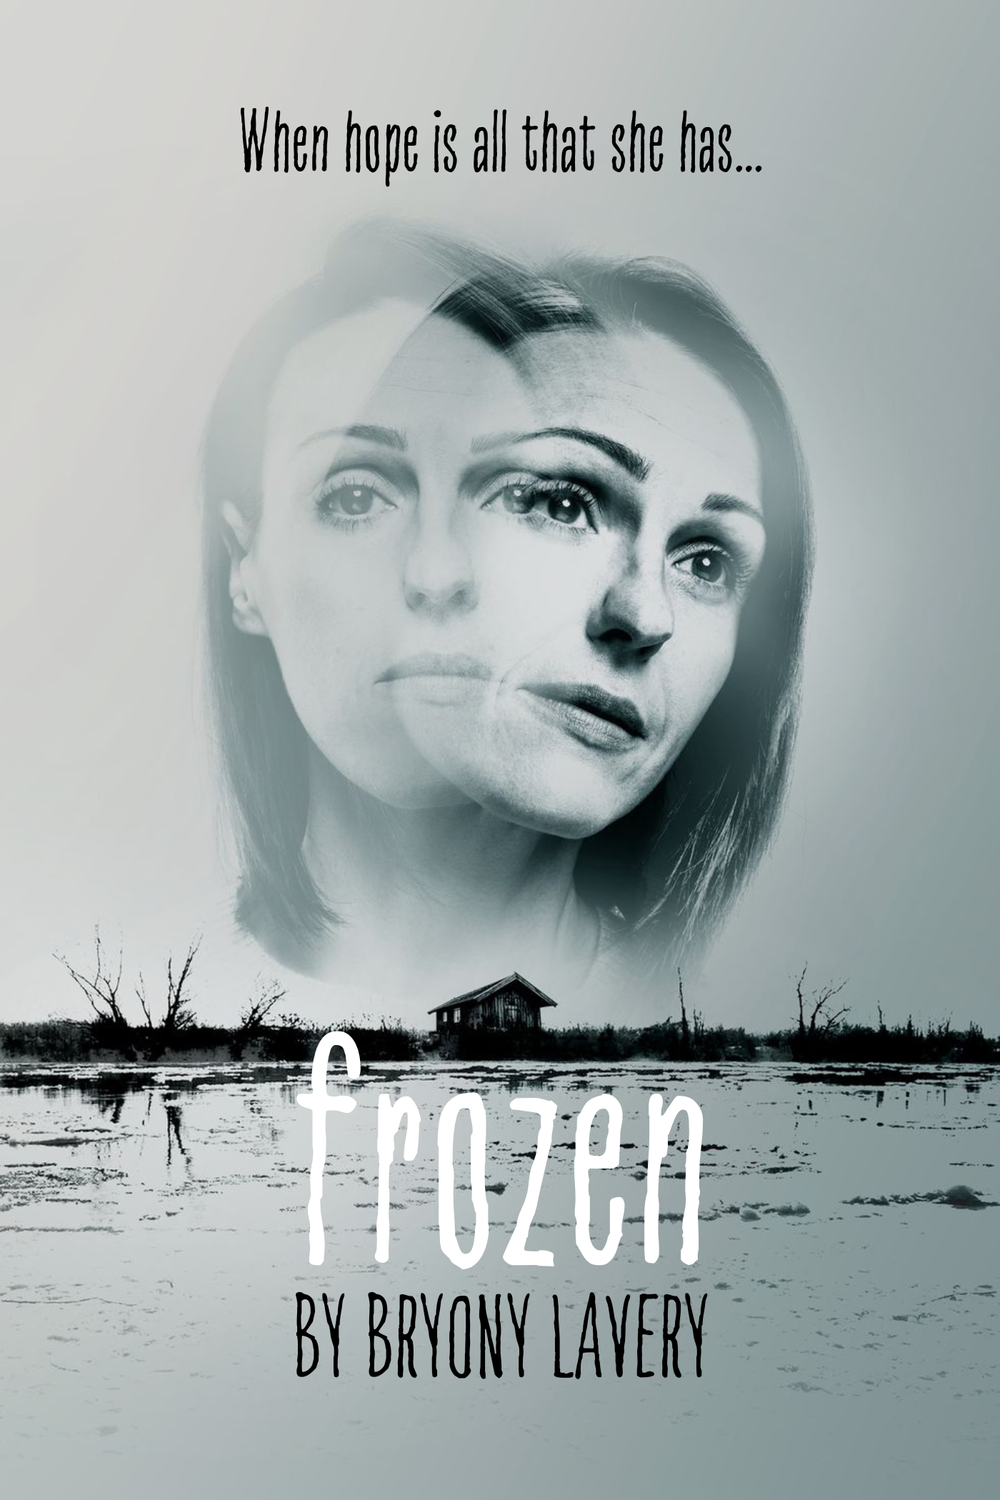 Bryony Lavery, Frozen Poster.png